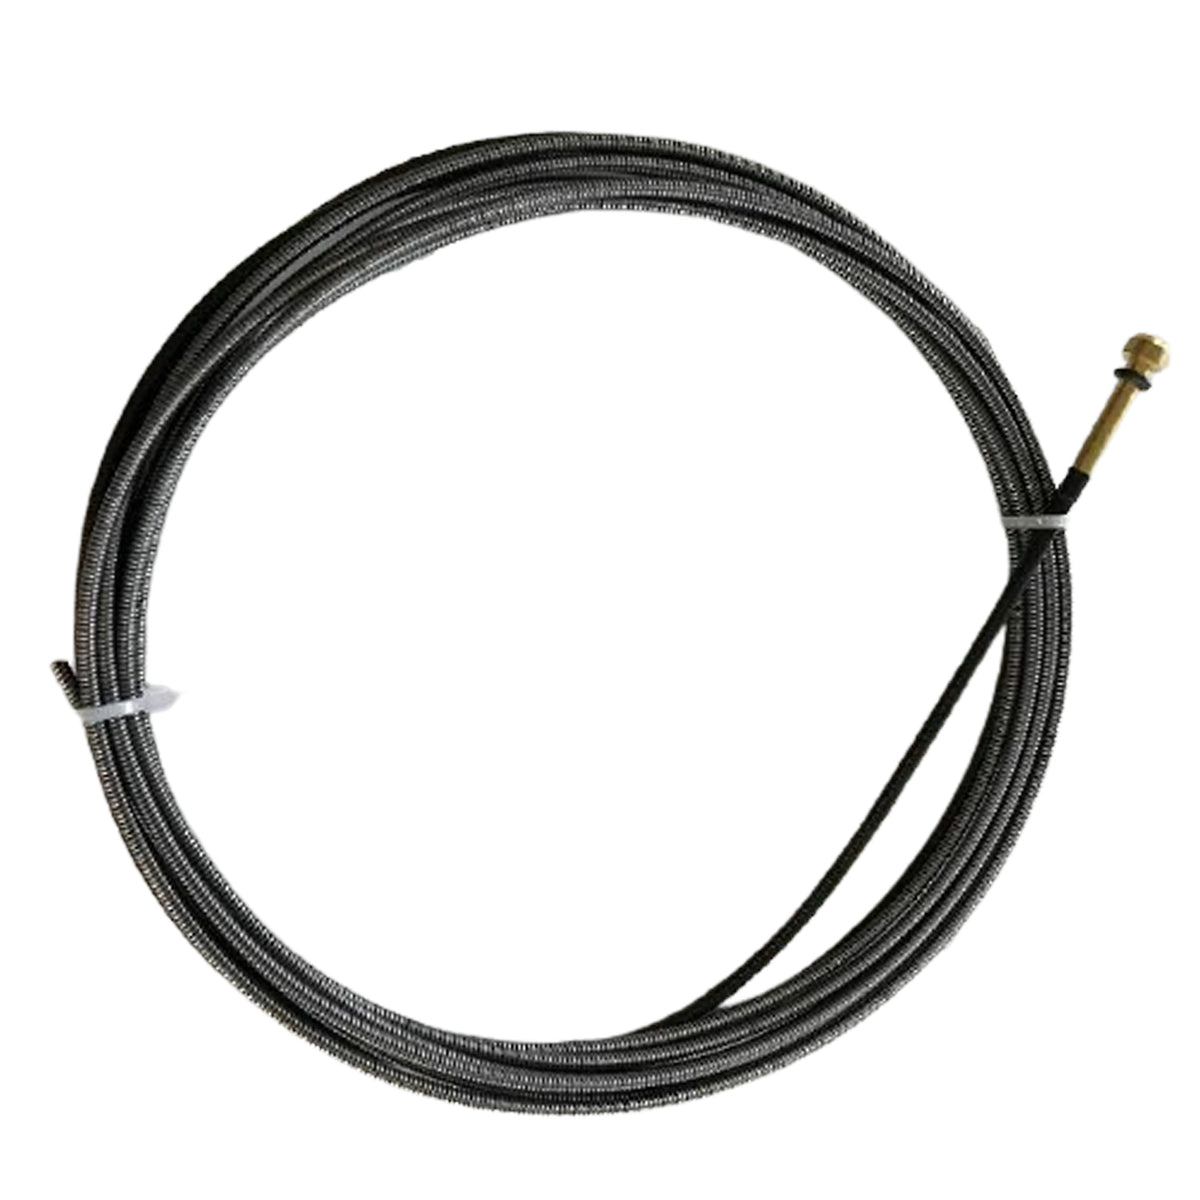 Liner 15ft fit up to .035 Wires fit Lincoln Core Pak 125 CorePak 11550 Welder